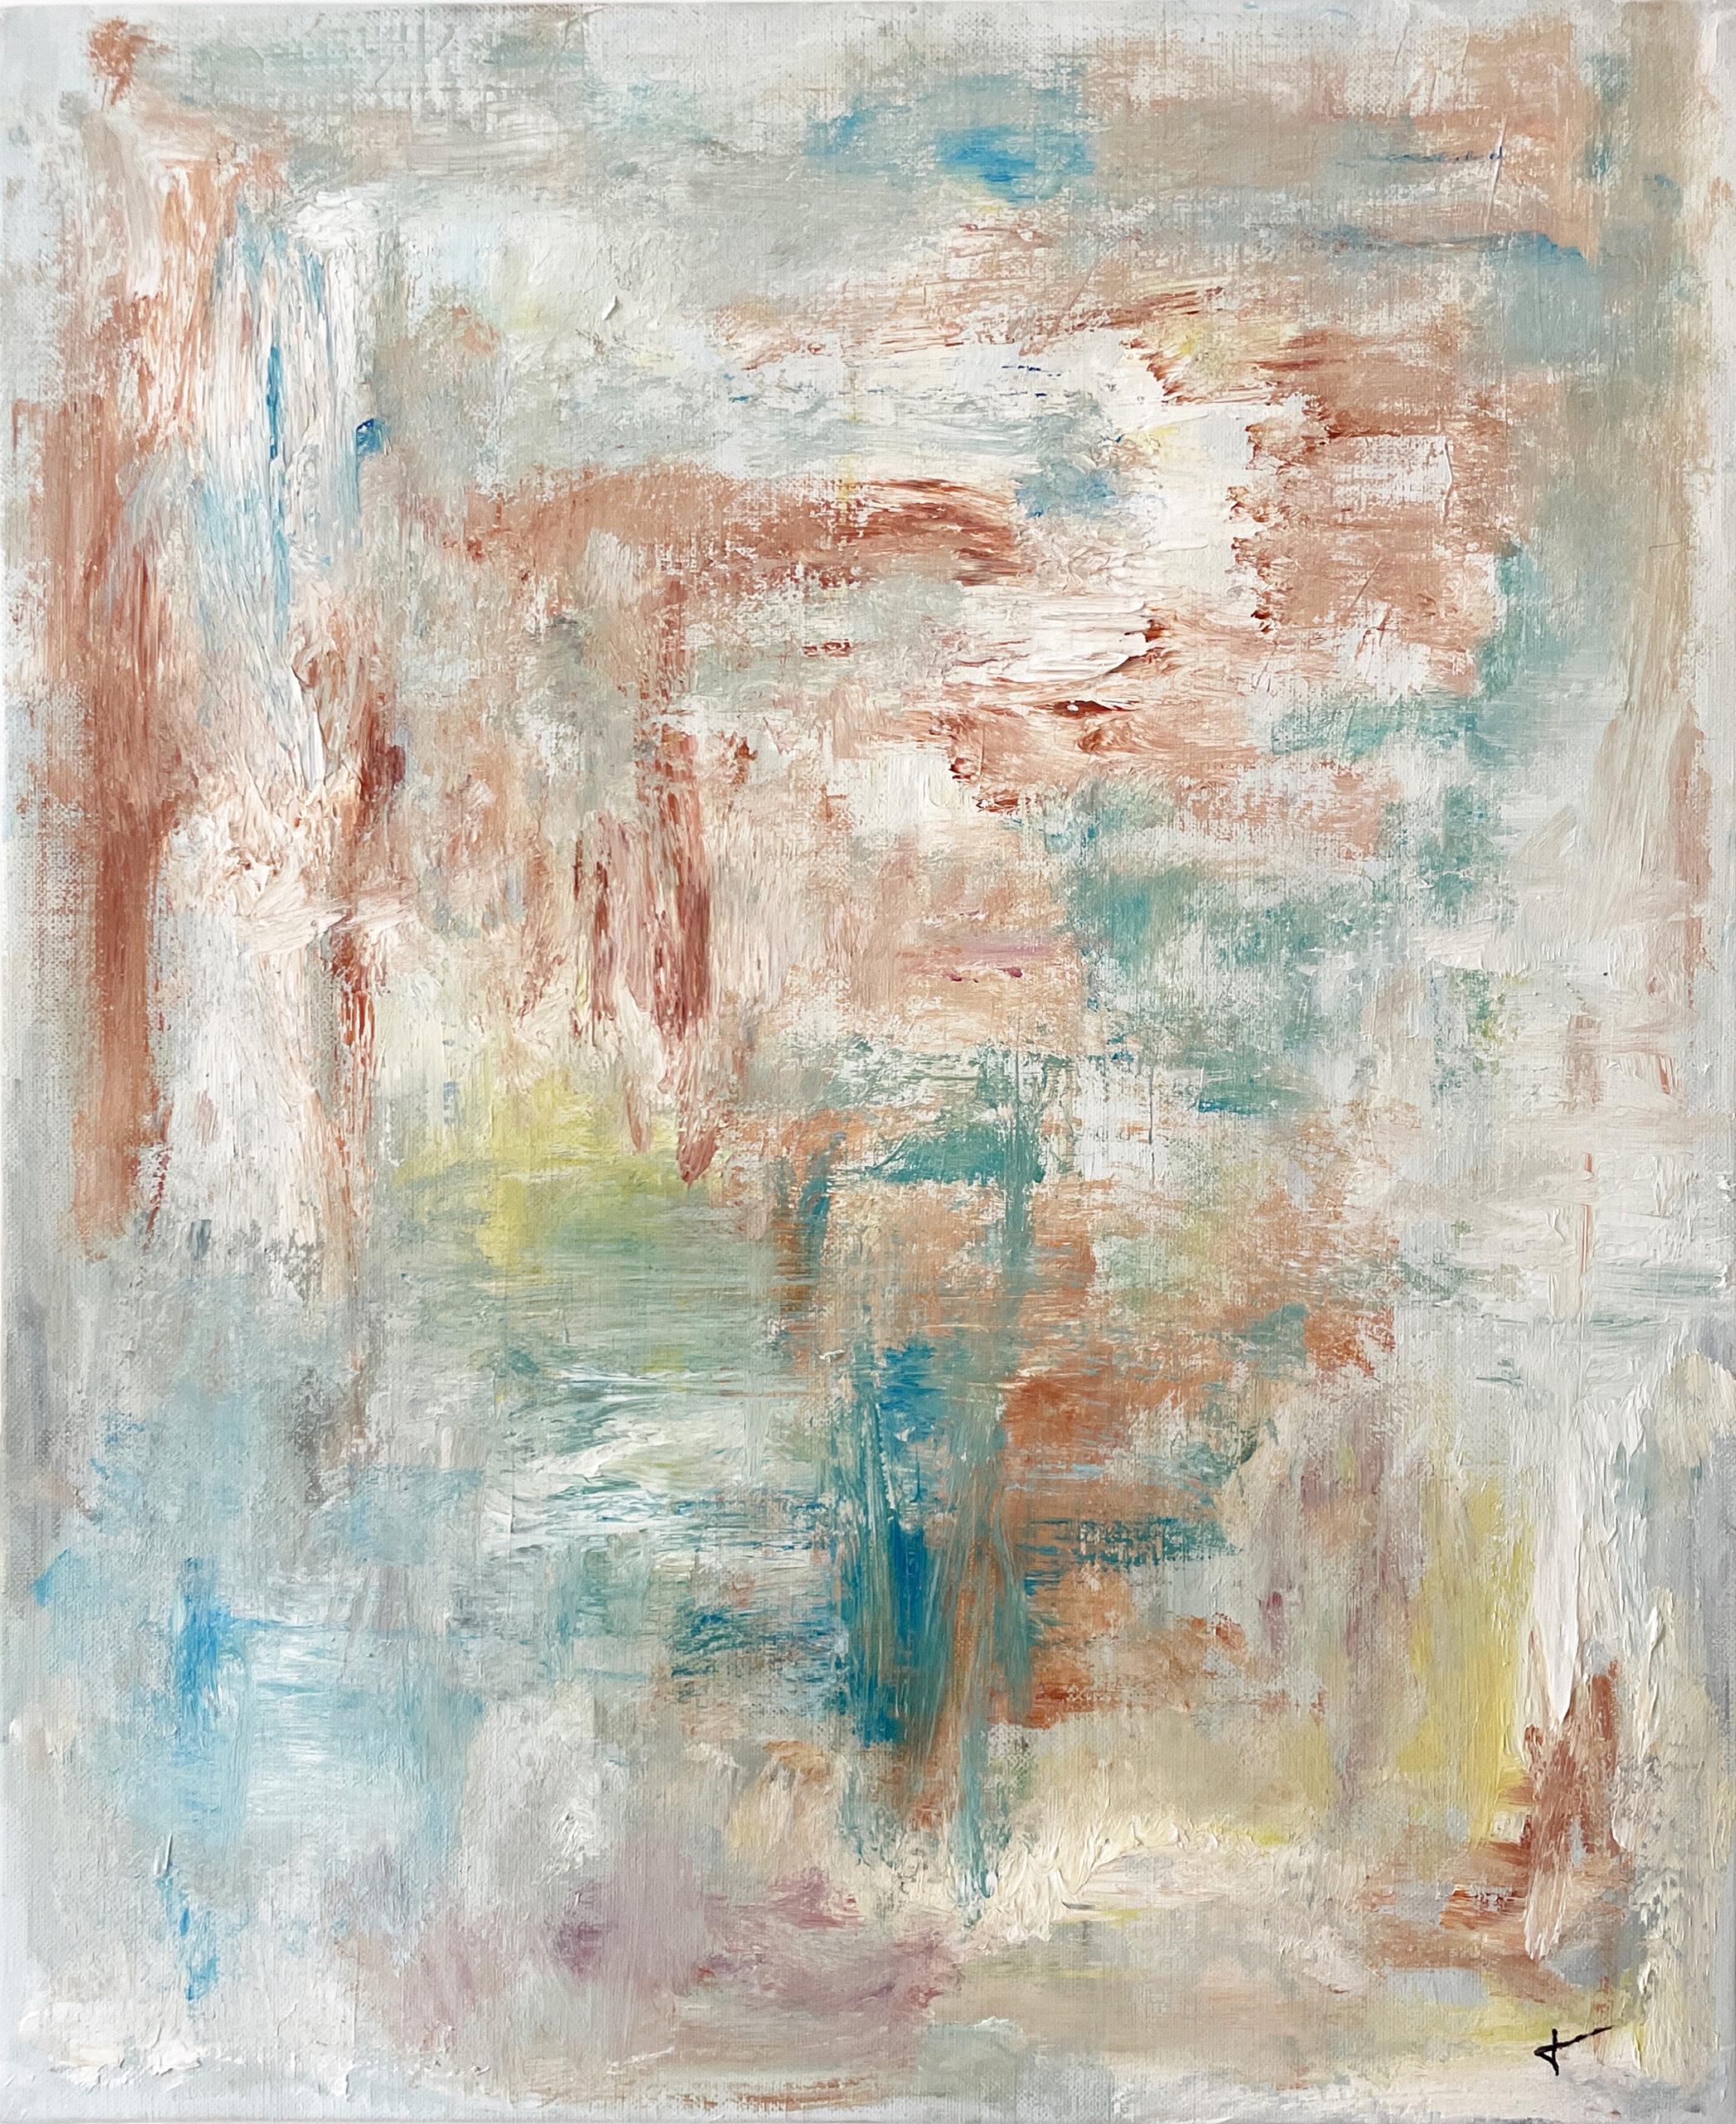 LE NUMÉRO 5 - Painting by Elise Tsikis